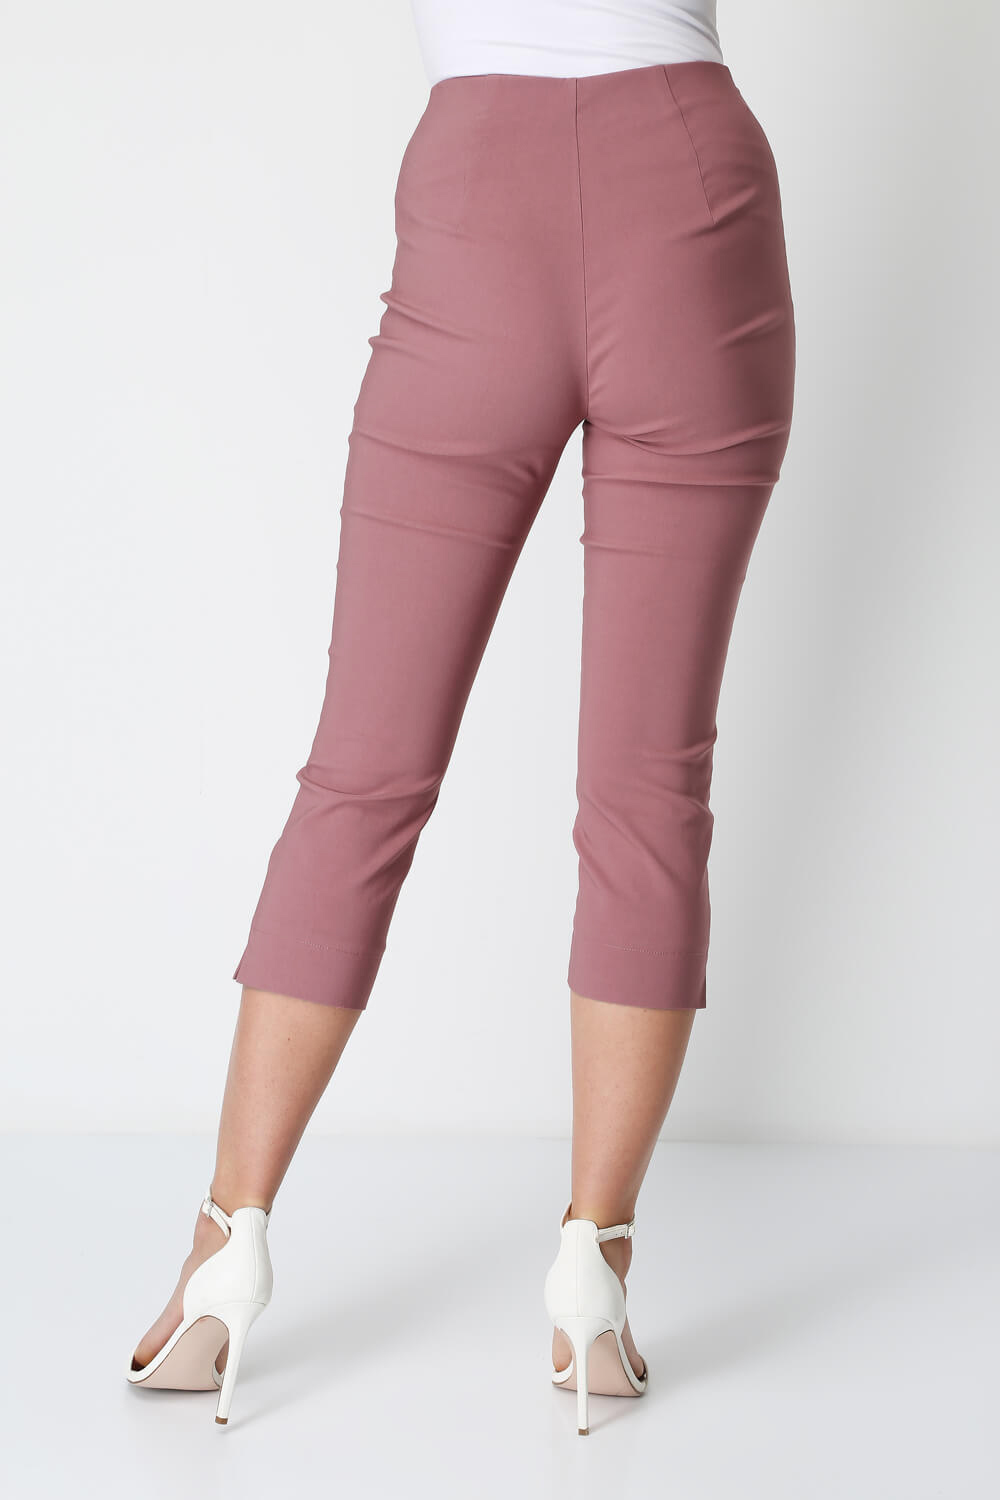 Dusky Pink Cropped Stretch Trouser, Image 2 of 4